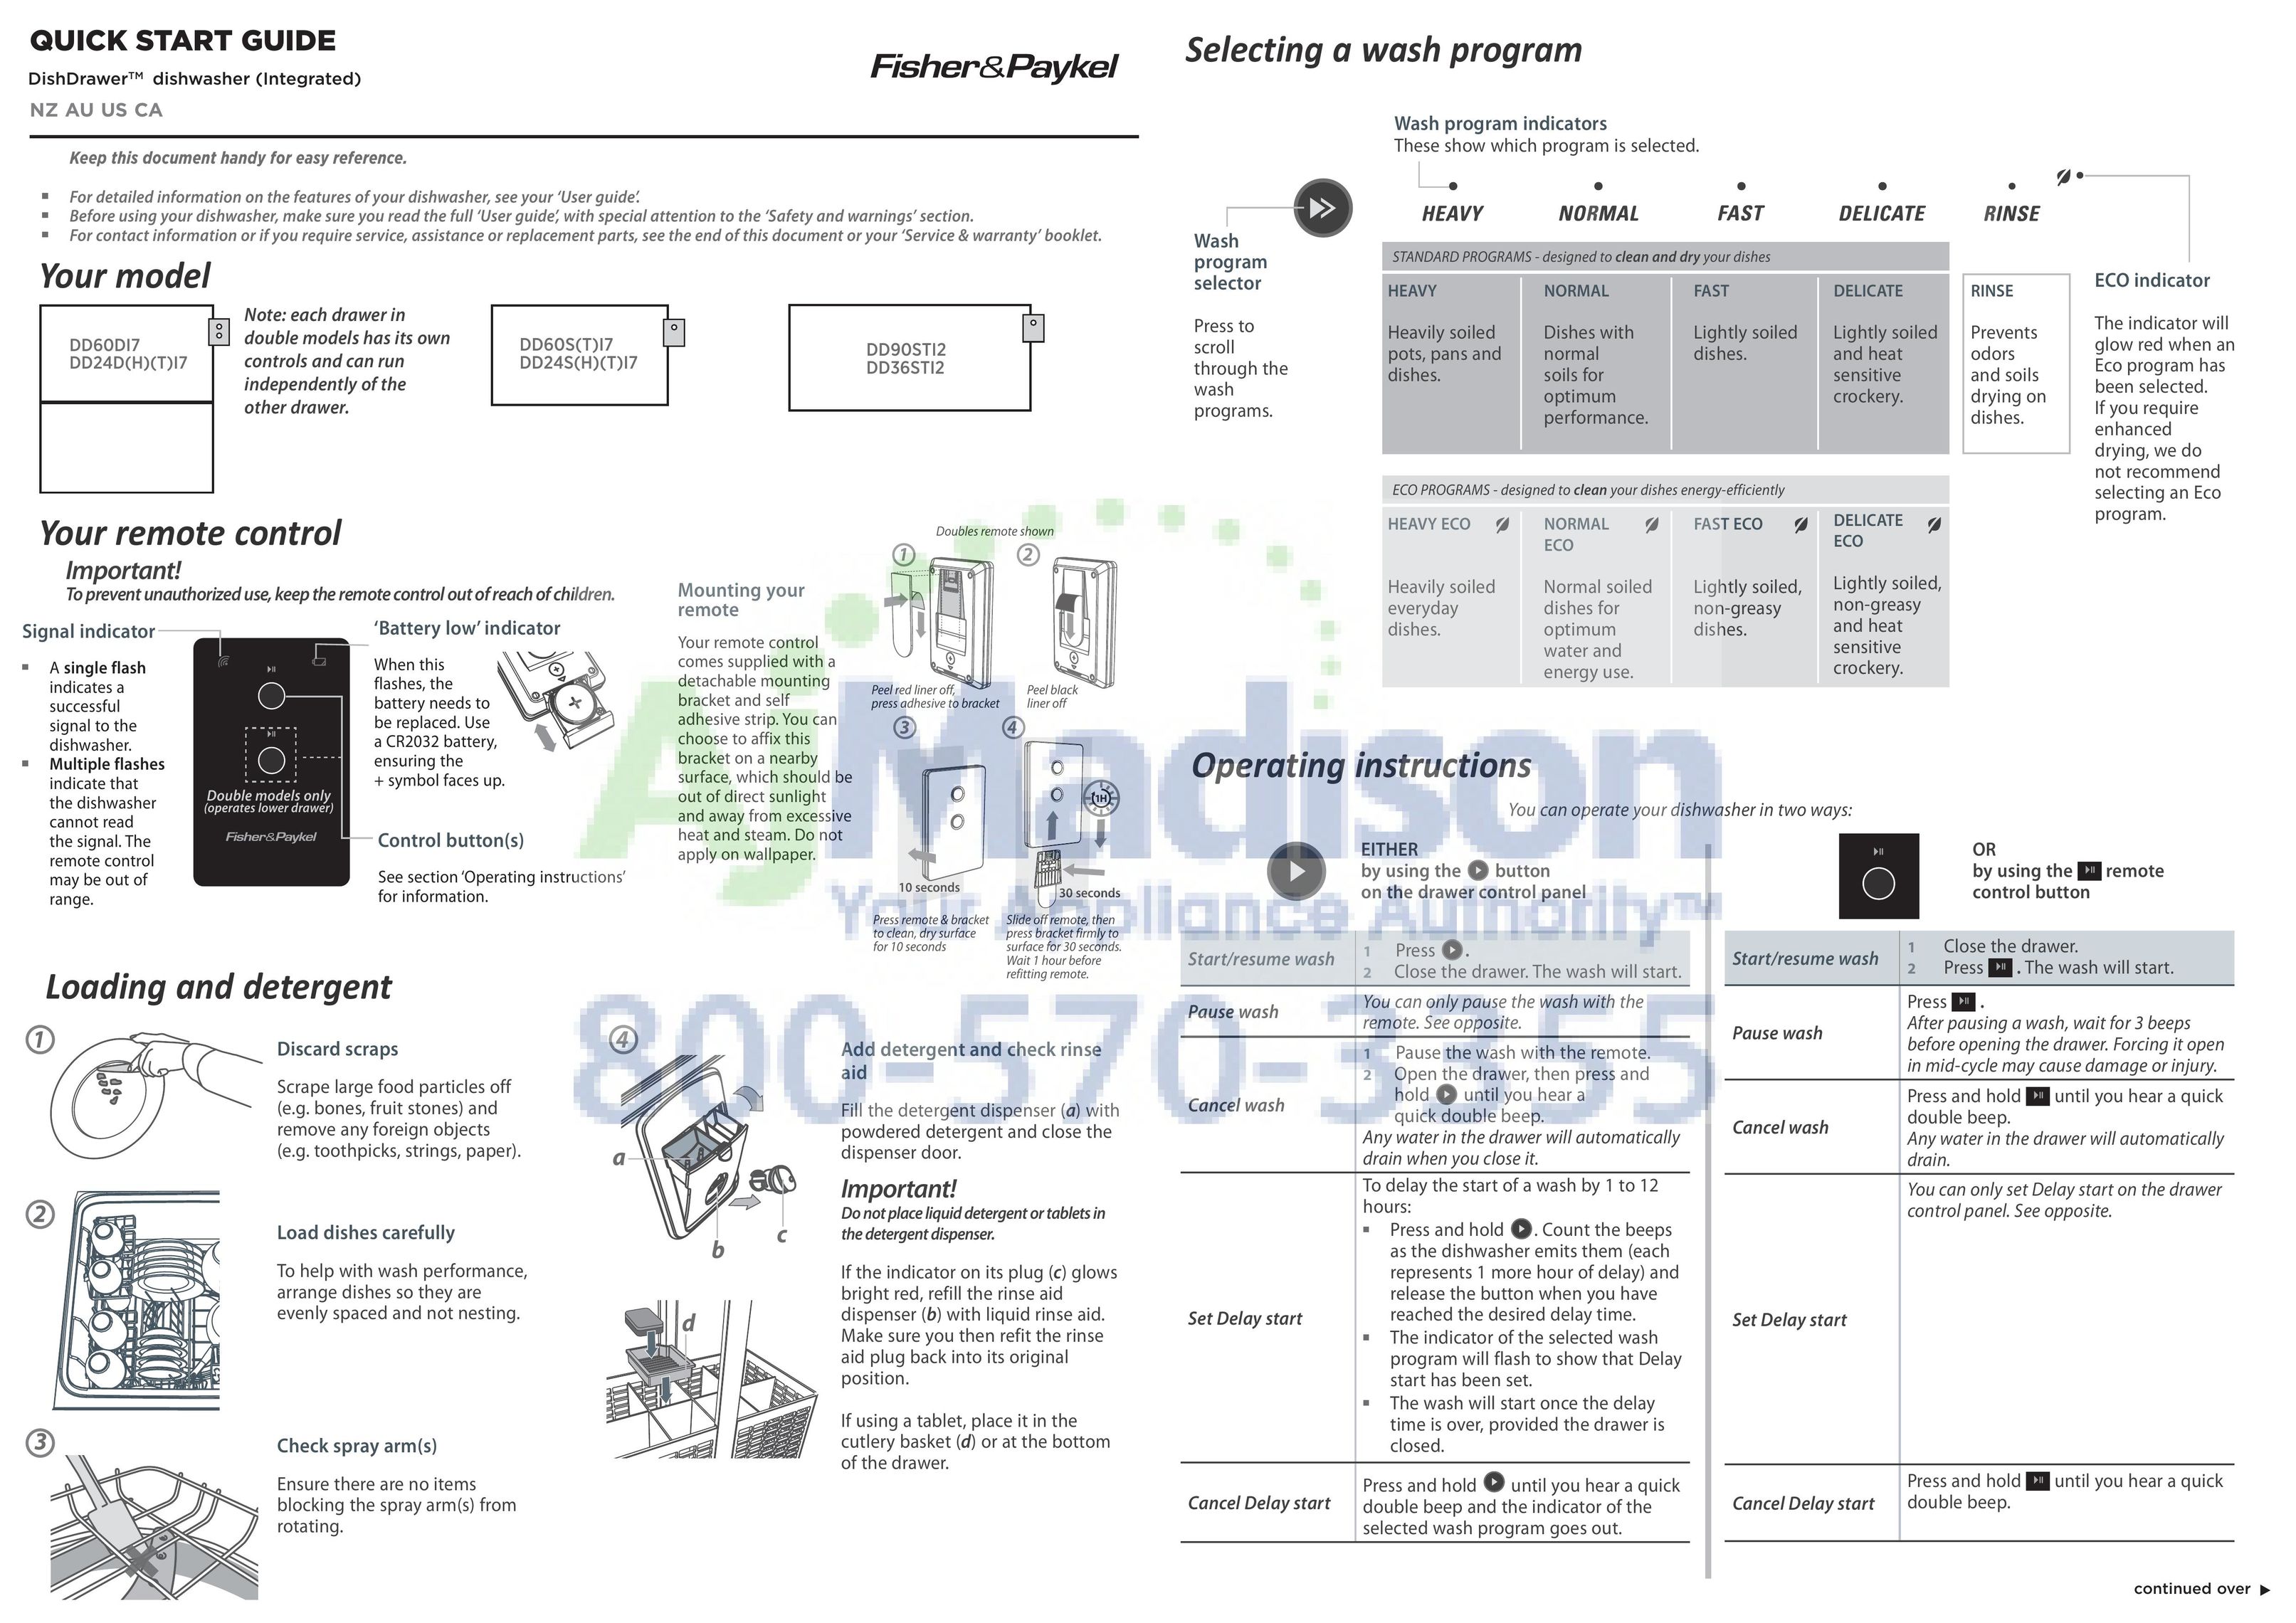 Fisher & Paykel DD24D(H)(T)I7 Dishwasher User Manual